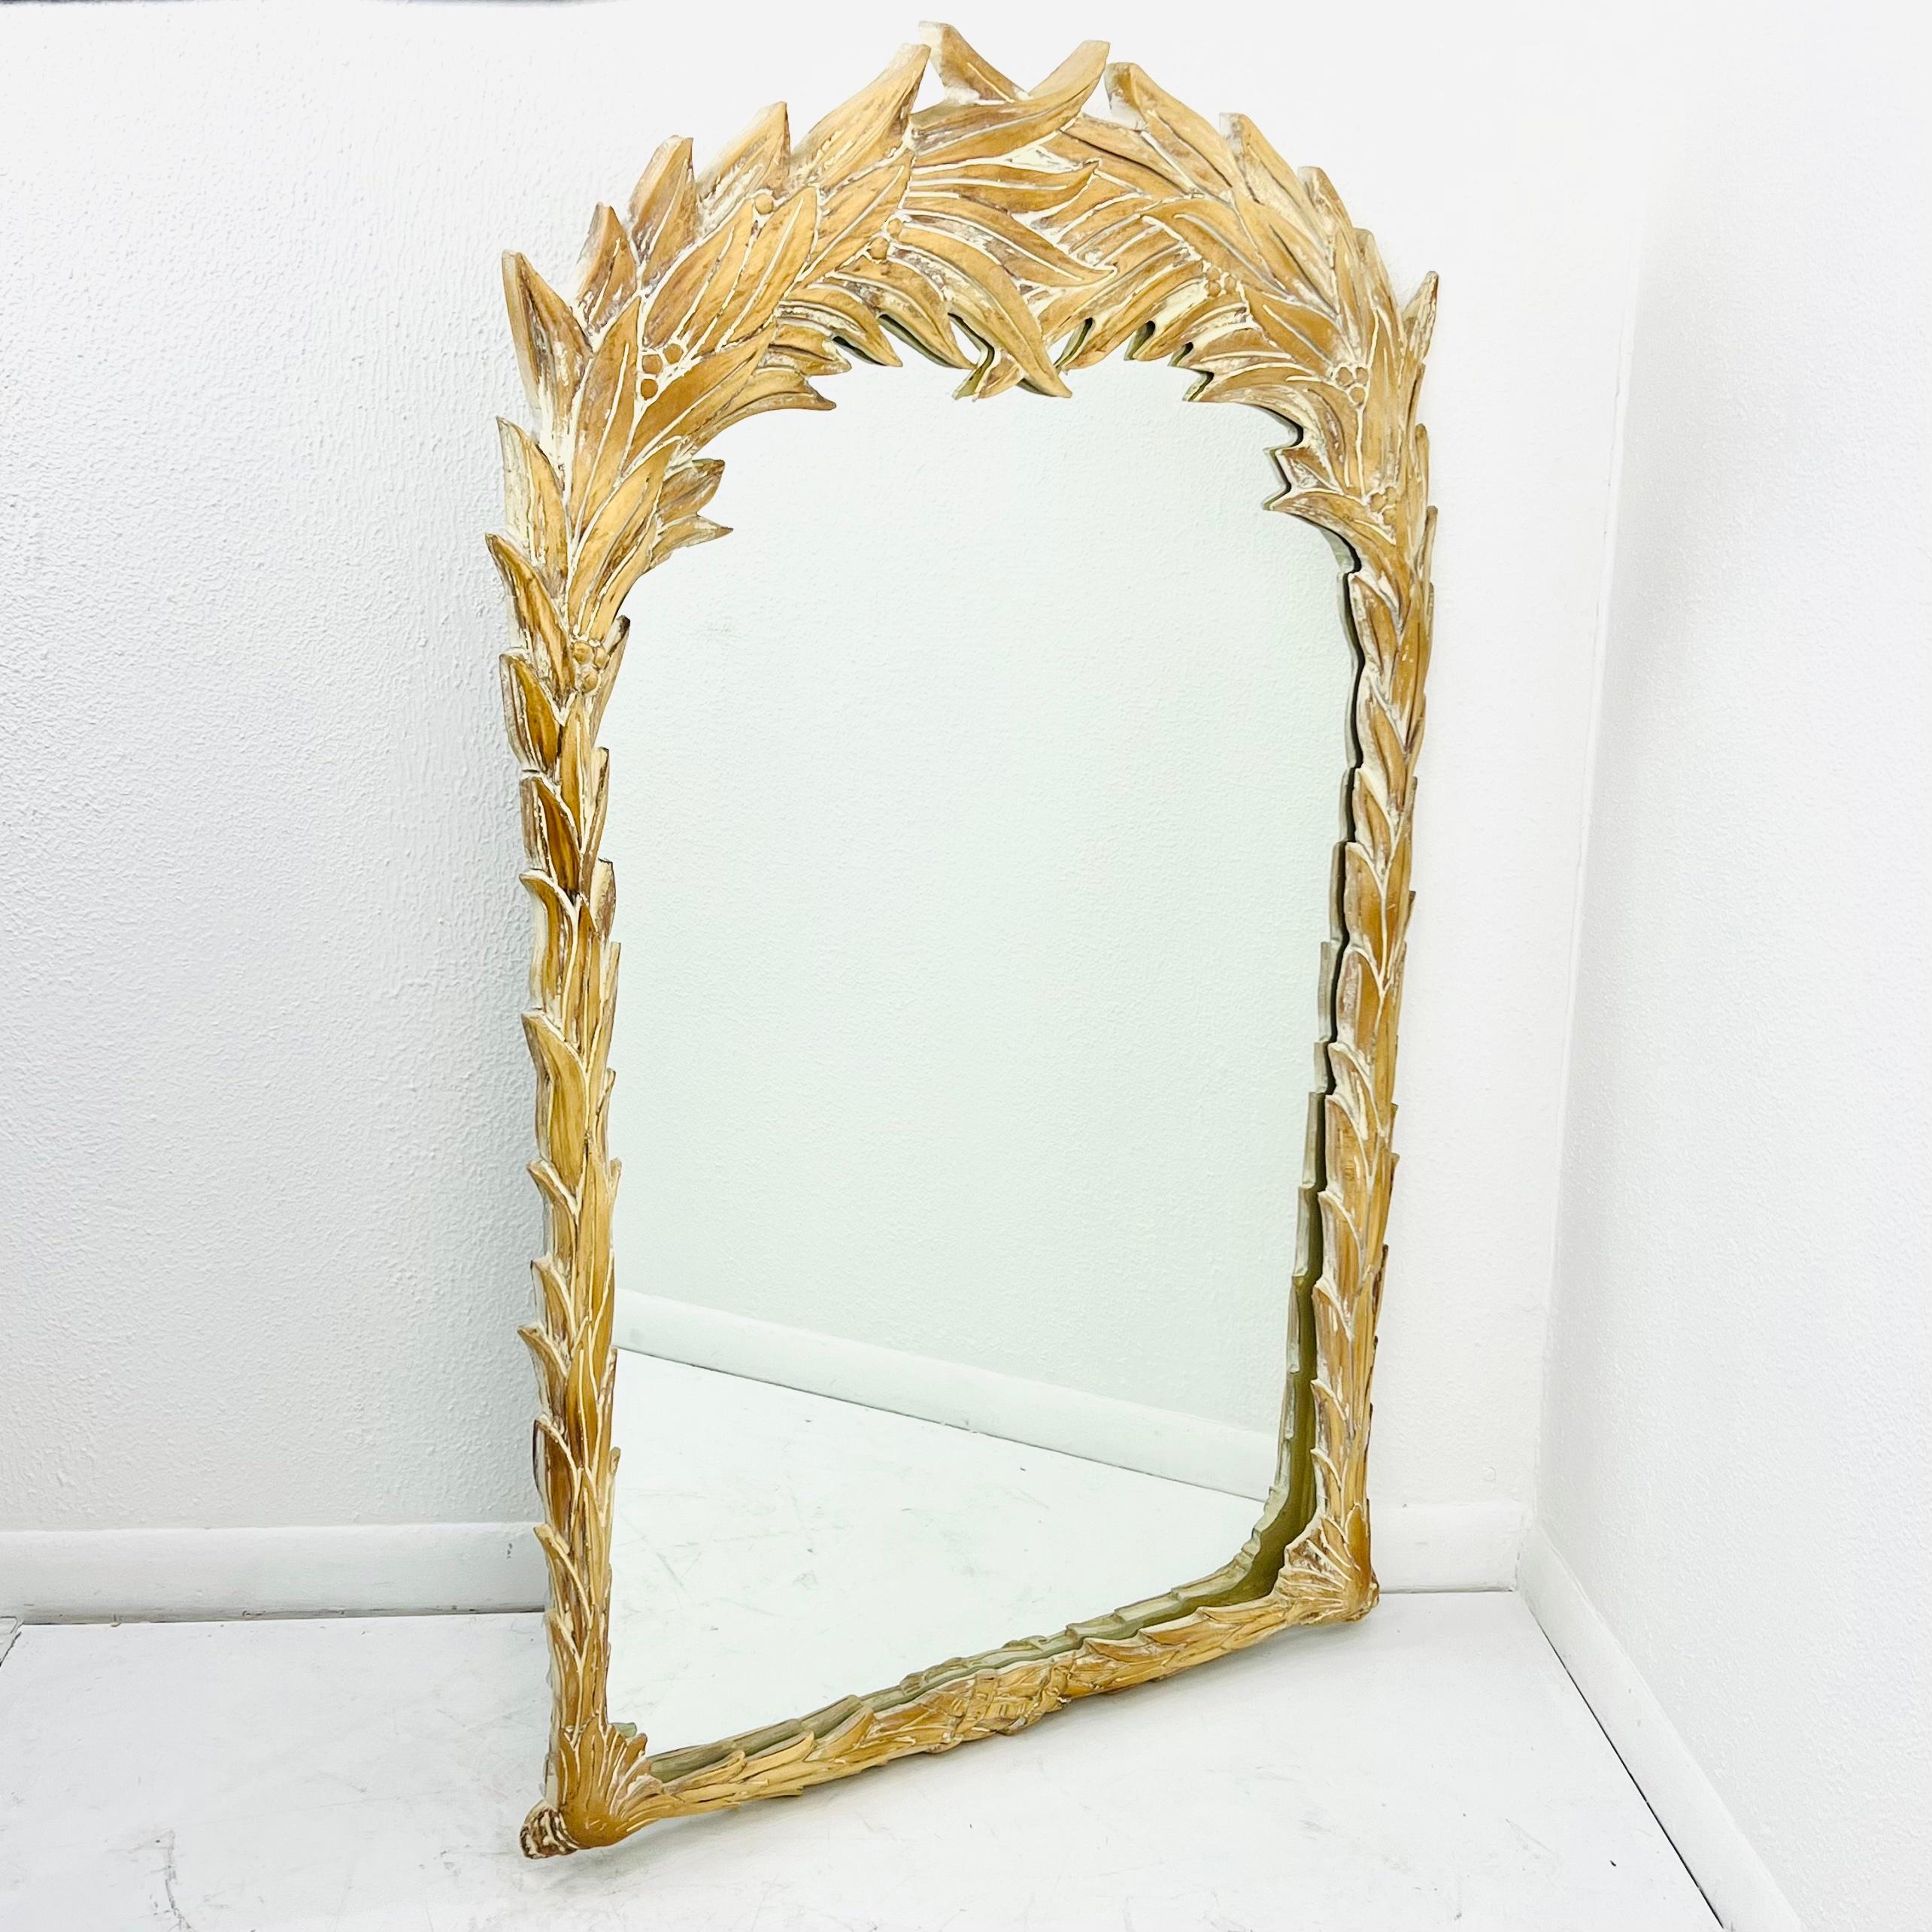 Carved Wood Palm Frond Mirror in the Style of Serge Roche For Sale 8